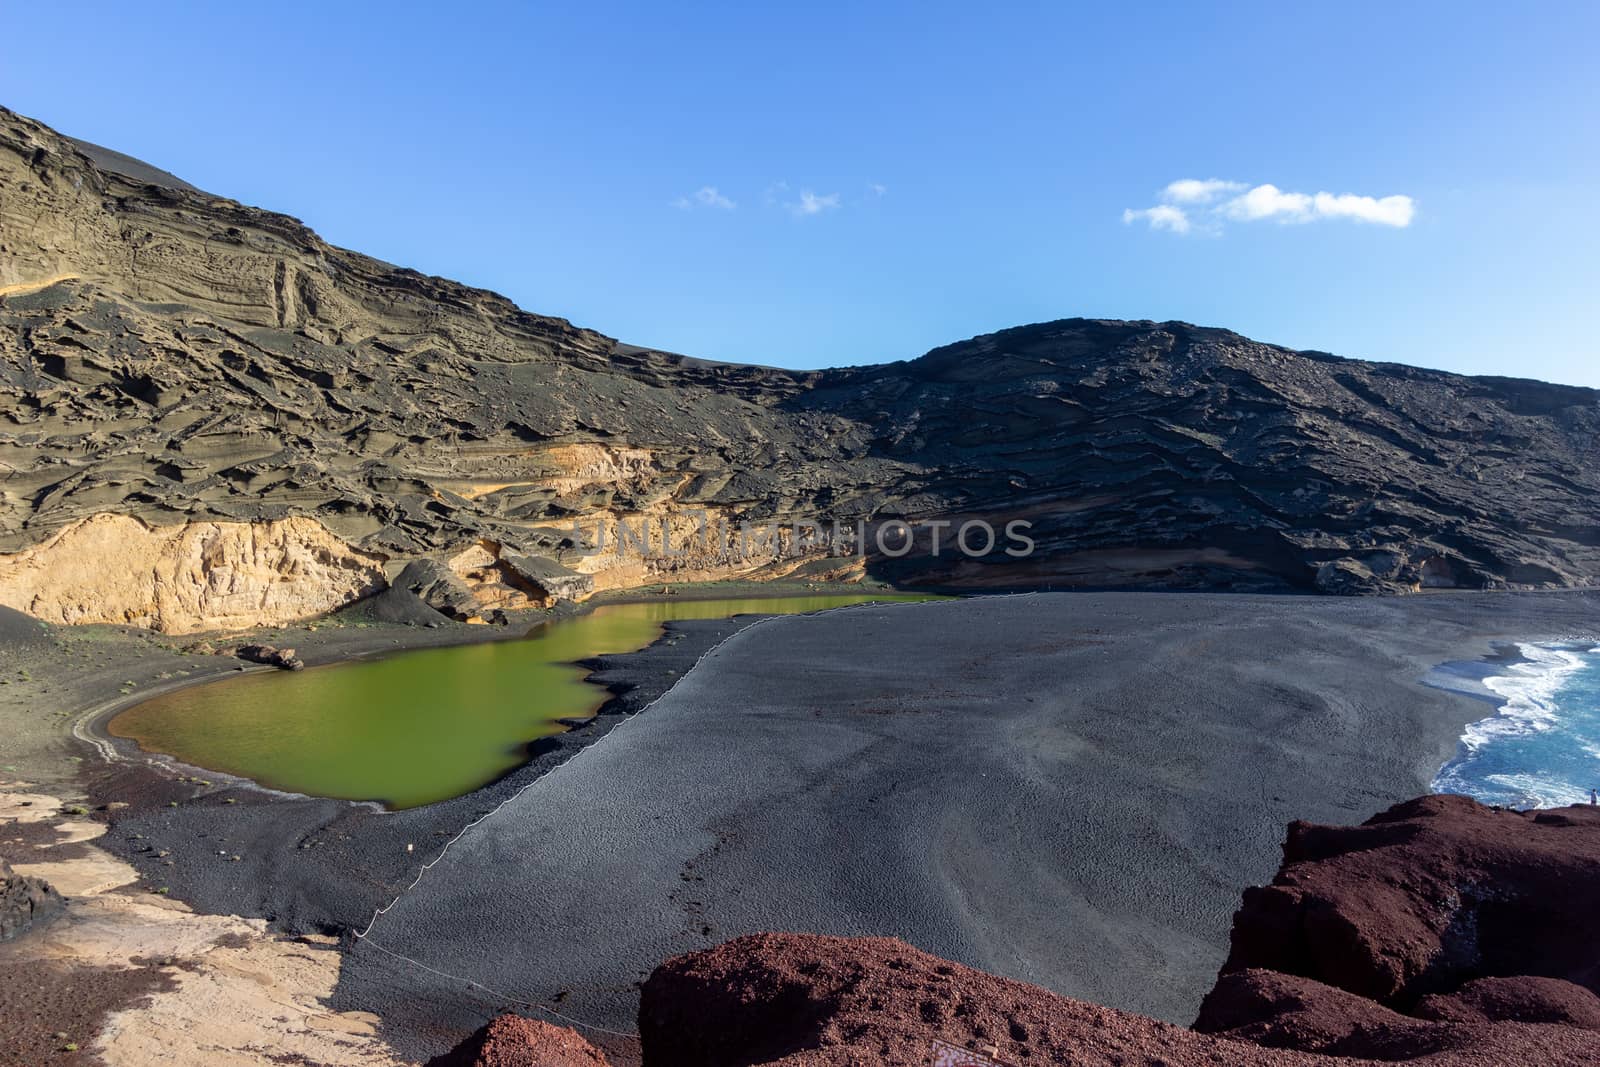 Lagoon with green water (Lago Verde) nearby El Golfo on canary island Lanzarote, Spain